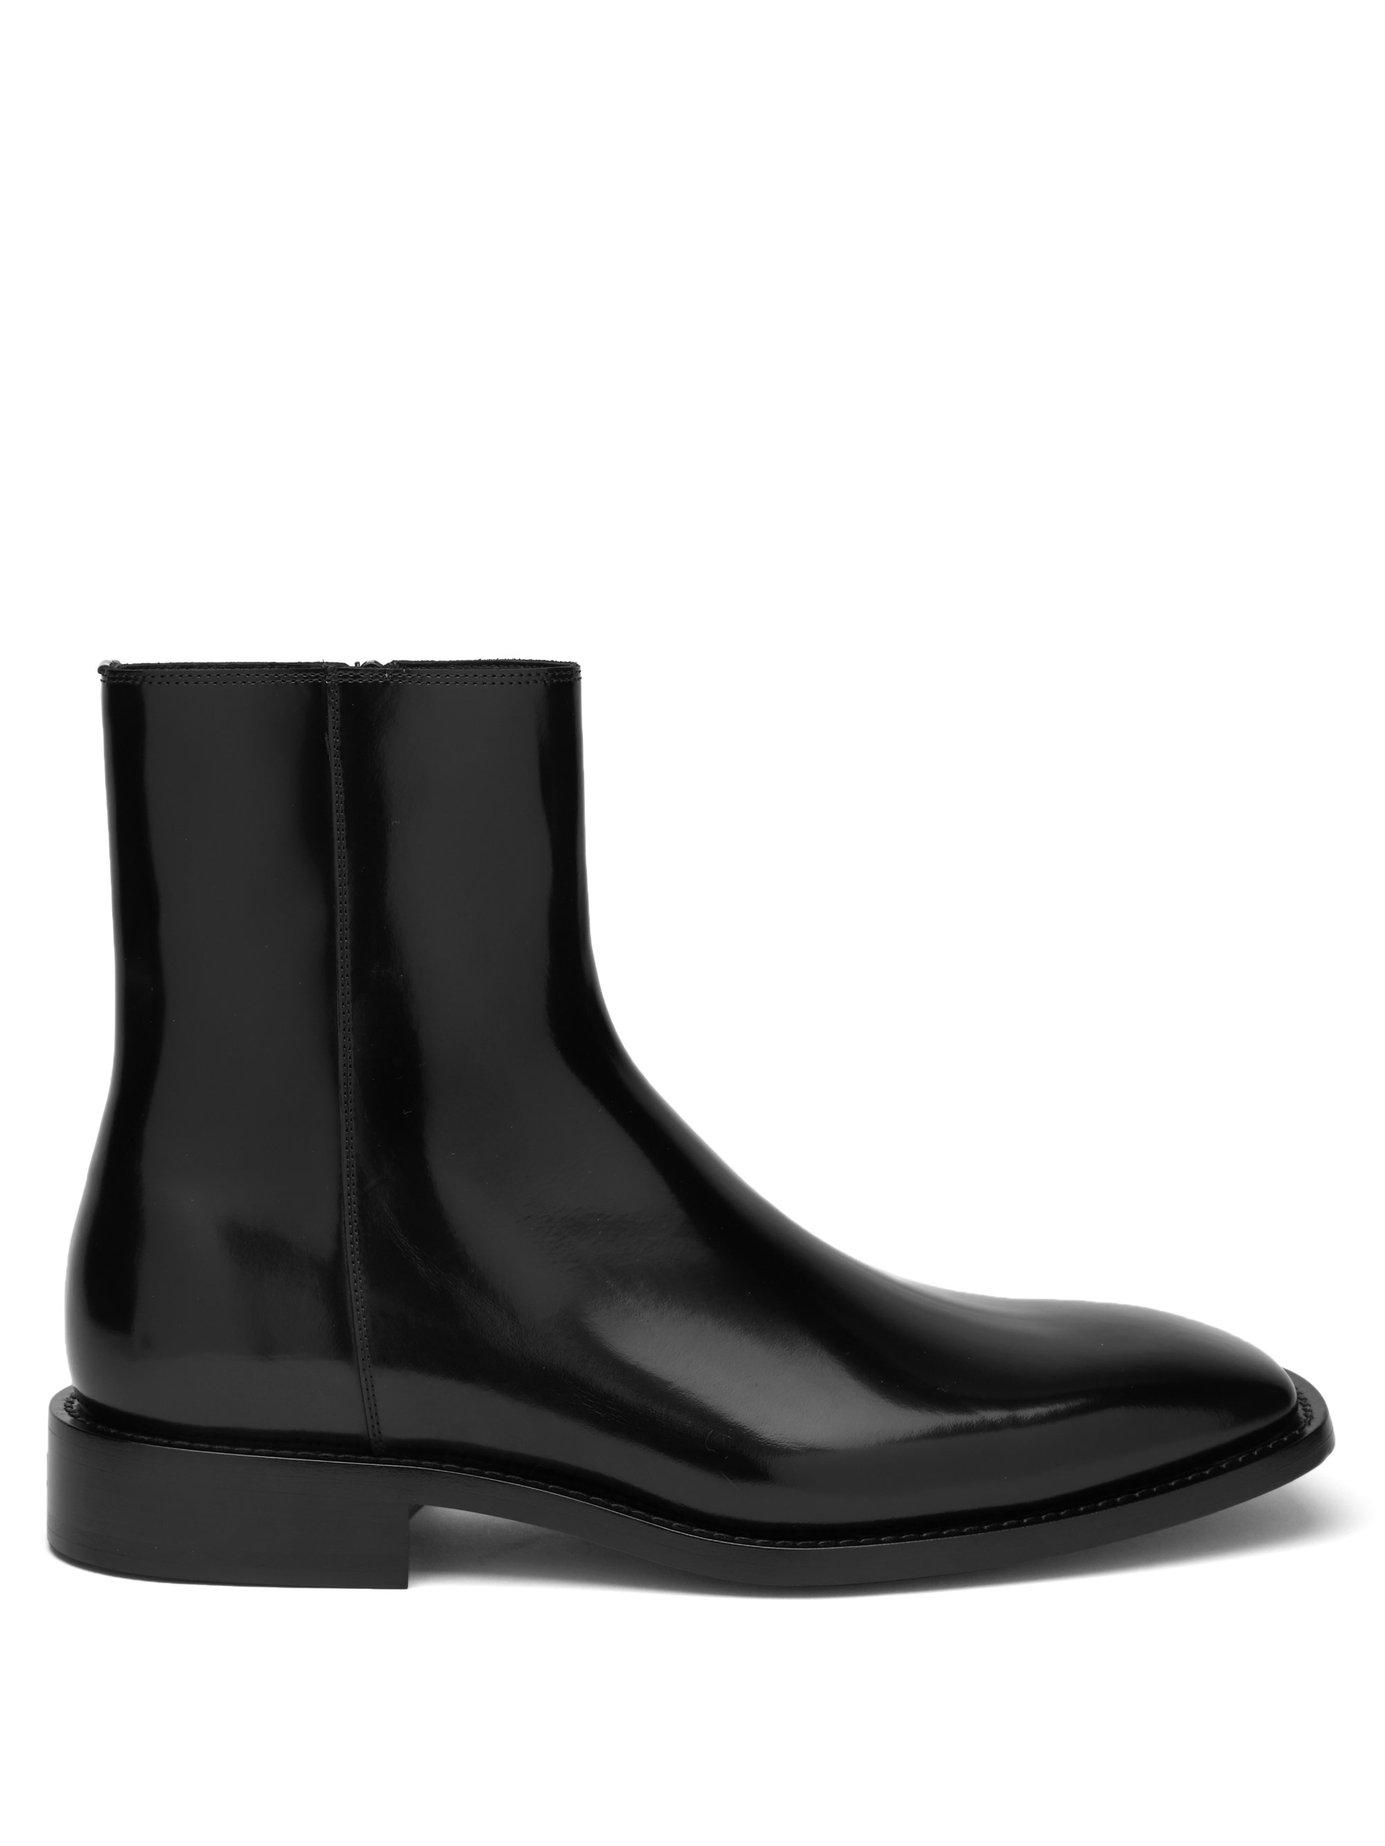 Balenciaga Square Toe Leather Boots in Black for Men - Lyst